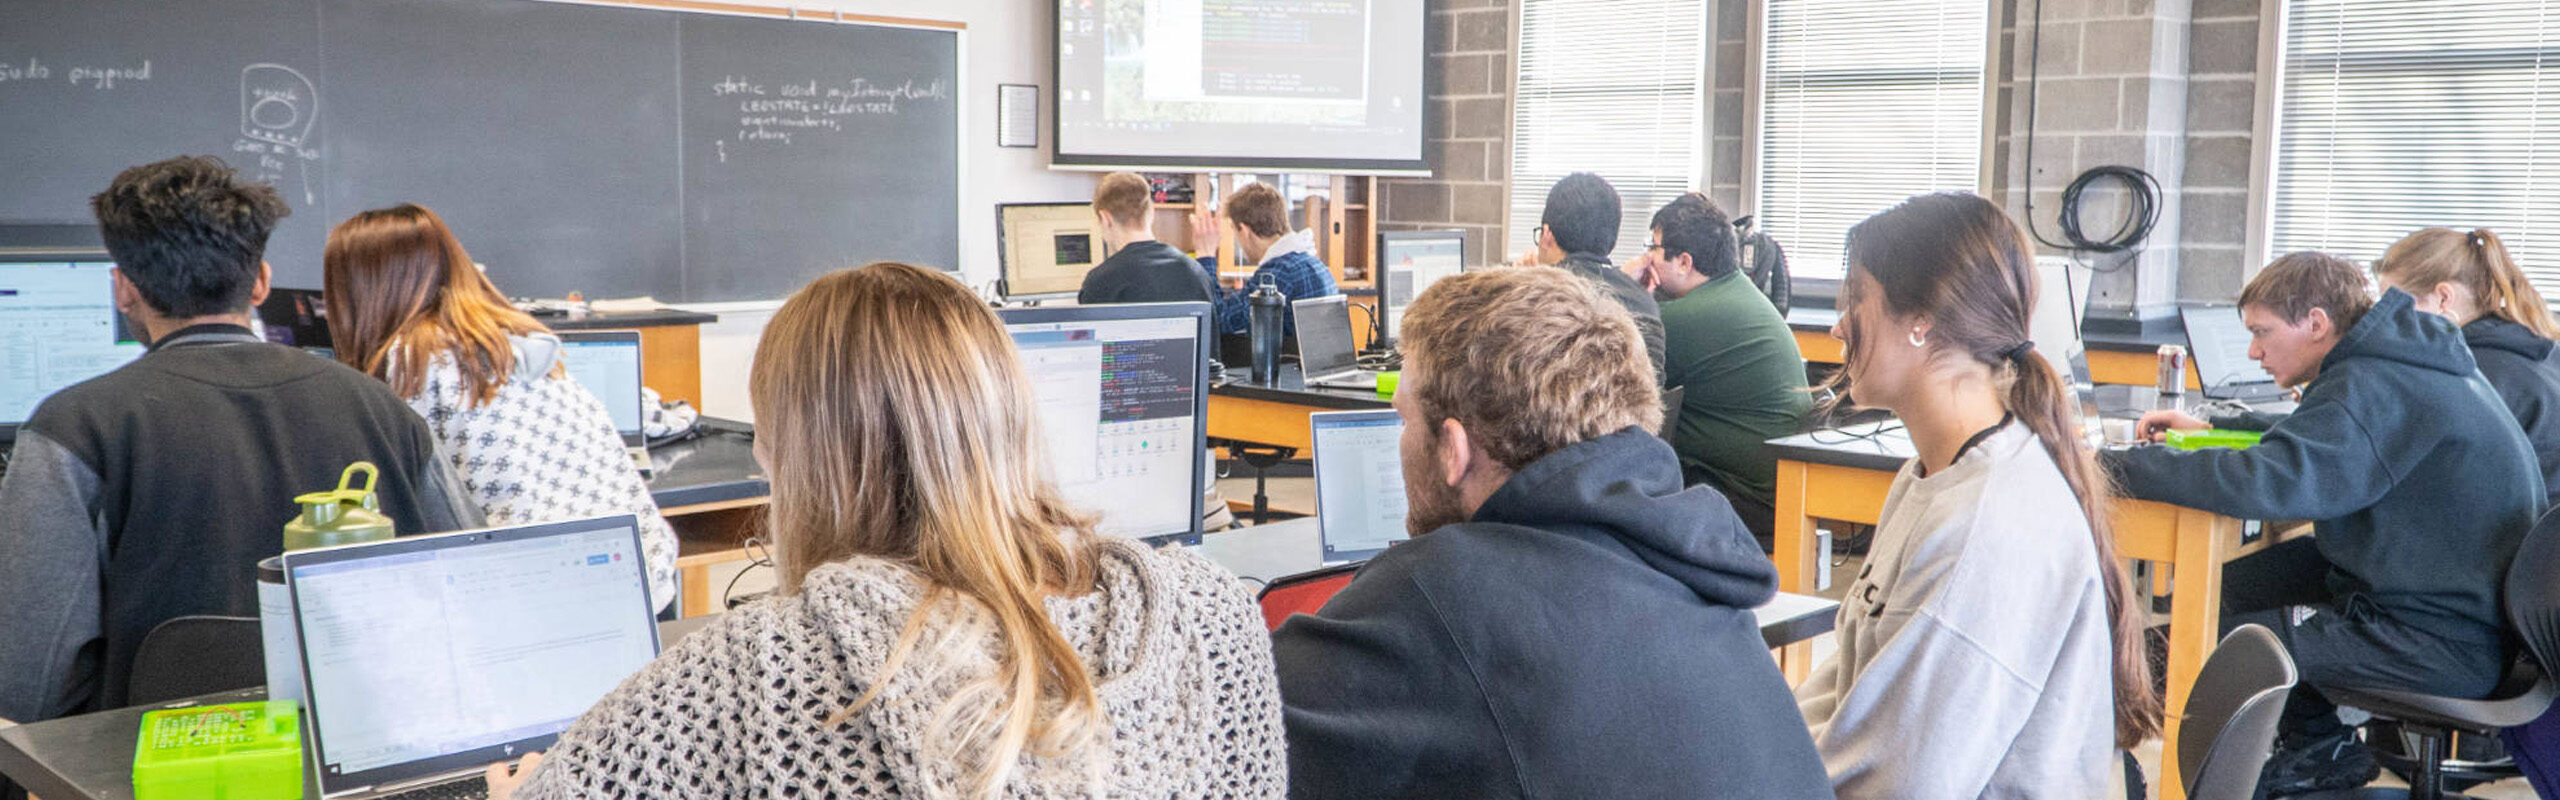 Loras College Students in classroom lab